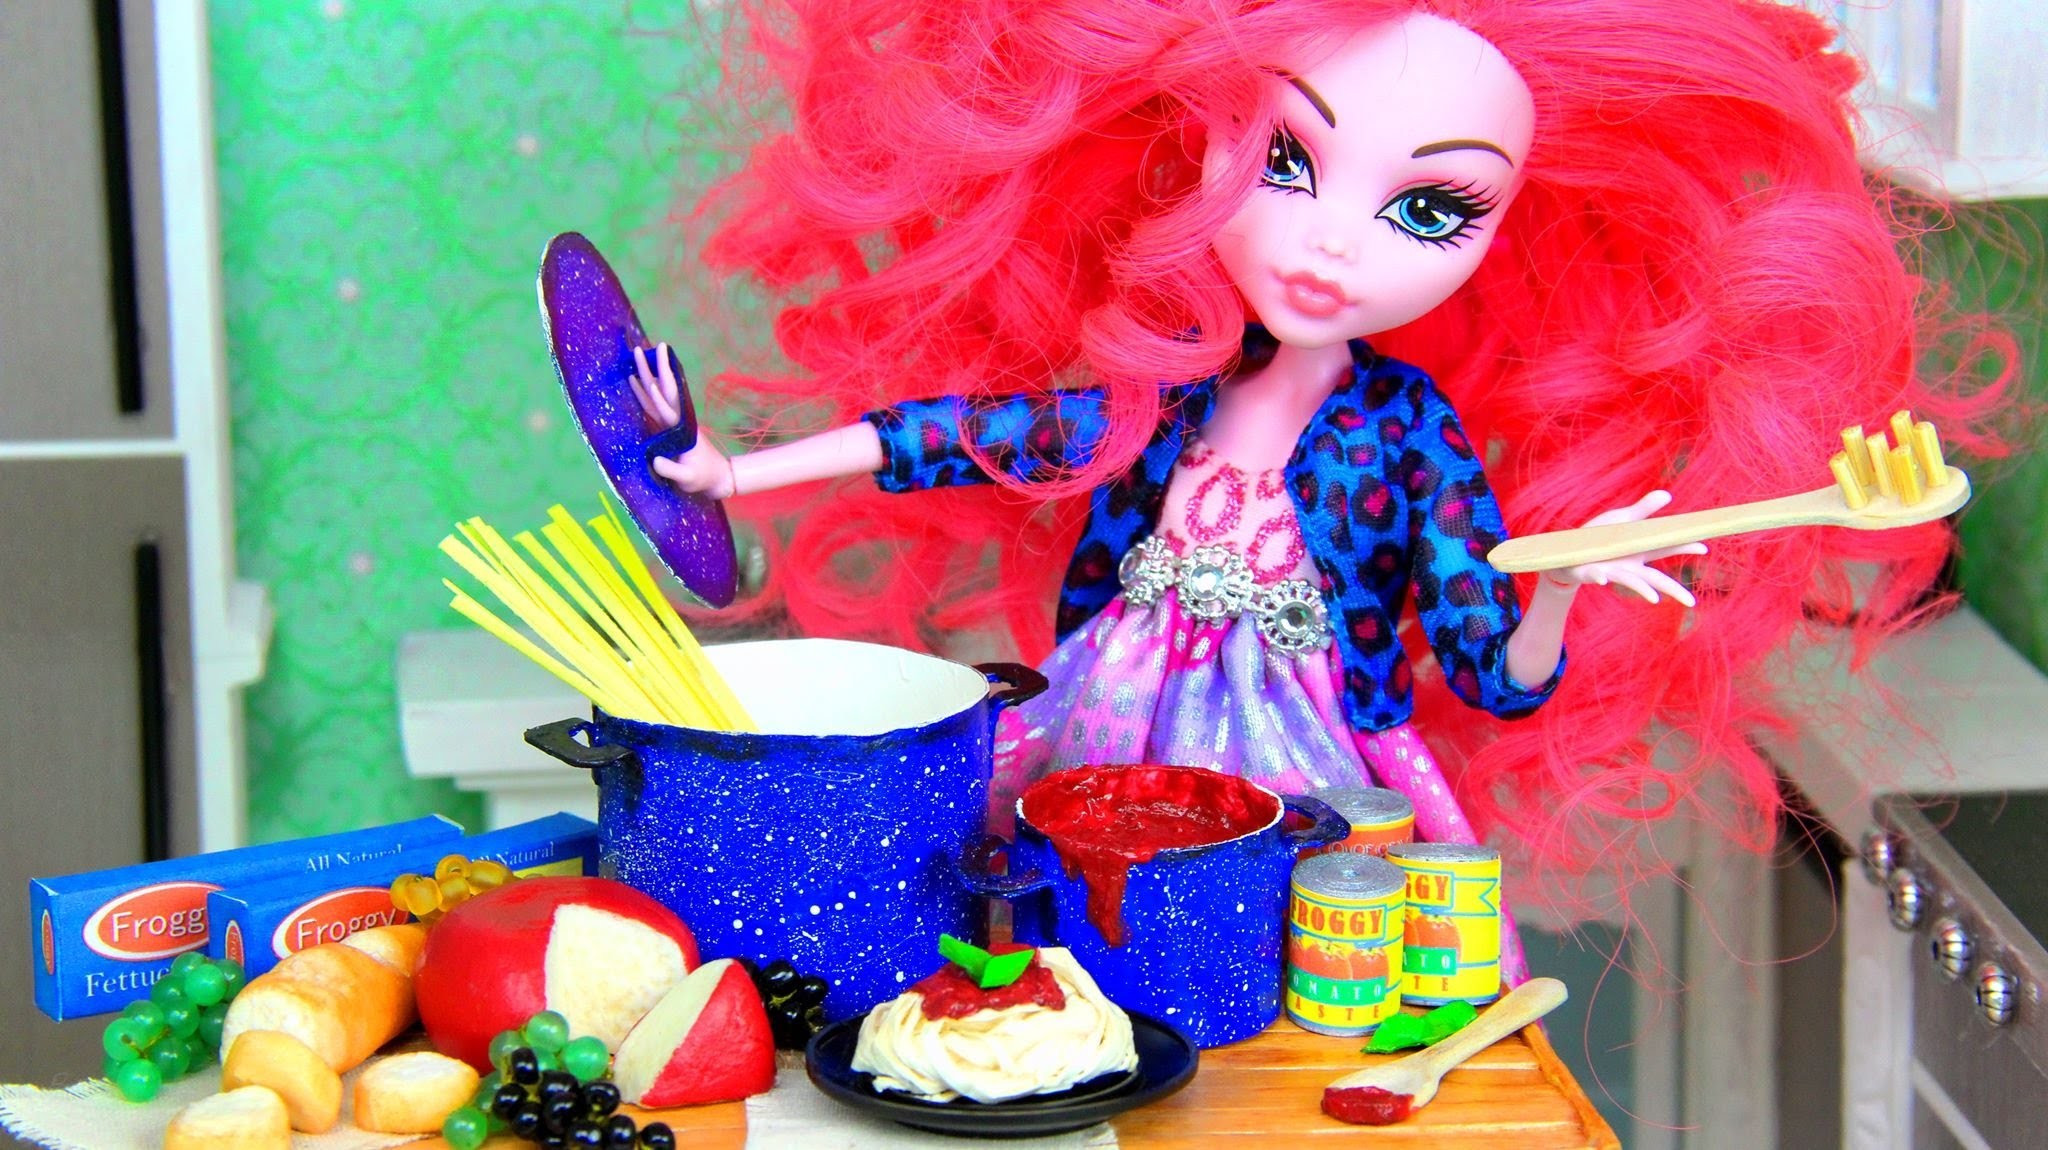 How to Make Doll Food : Pasta - Doll Crafts